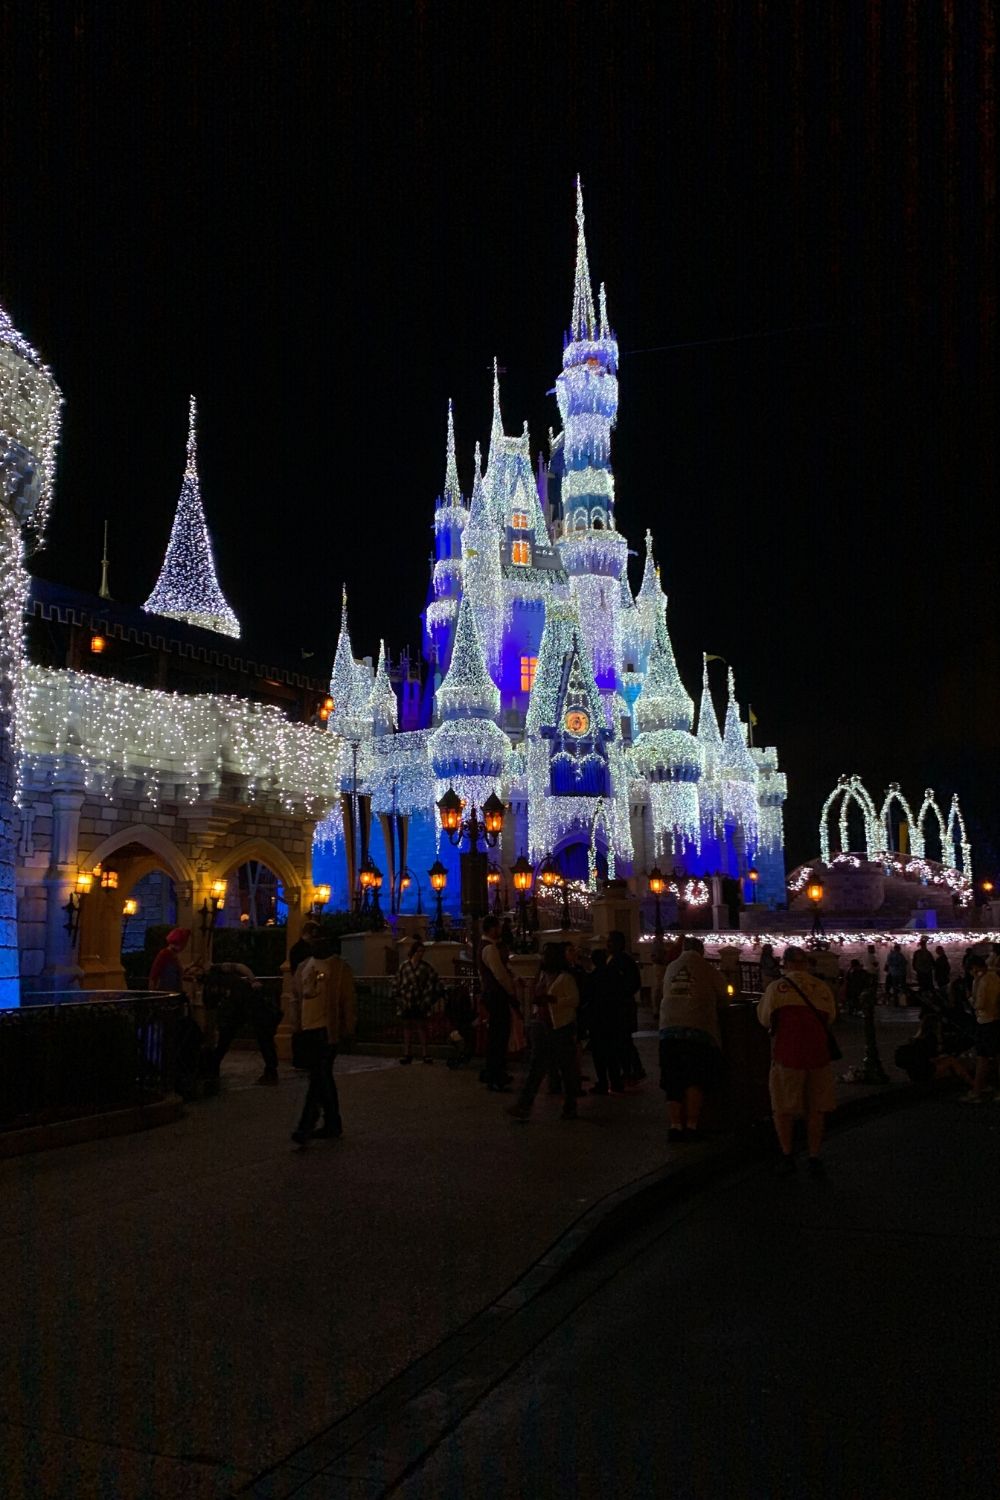 Disney At Christmas is a definite Must-Do. Here is Insider Guide to Mickey's Very Merry Christmas Party at Walt Disney World that includes all the details about this festive Disney holiday party. If you are planning to attend Mickey's Very Merry Christmas Party at Magic Kingdom, read this essential guide for helpful Disney planning tips. #DisneyTips #DisneyChristmas #MickeysVeryMerryChristmasParty